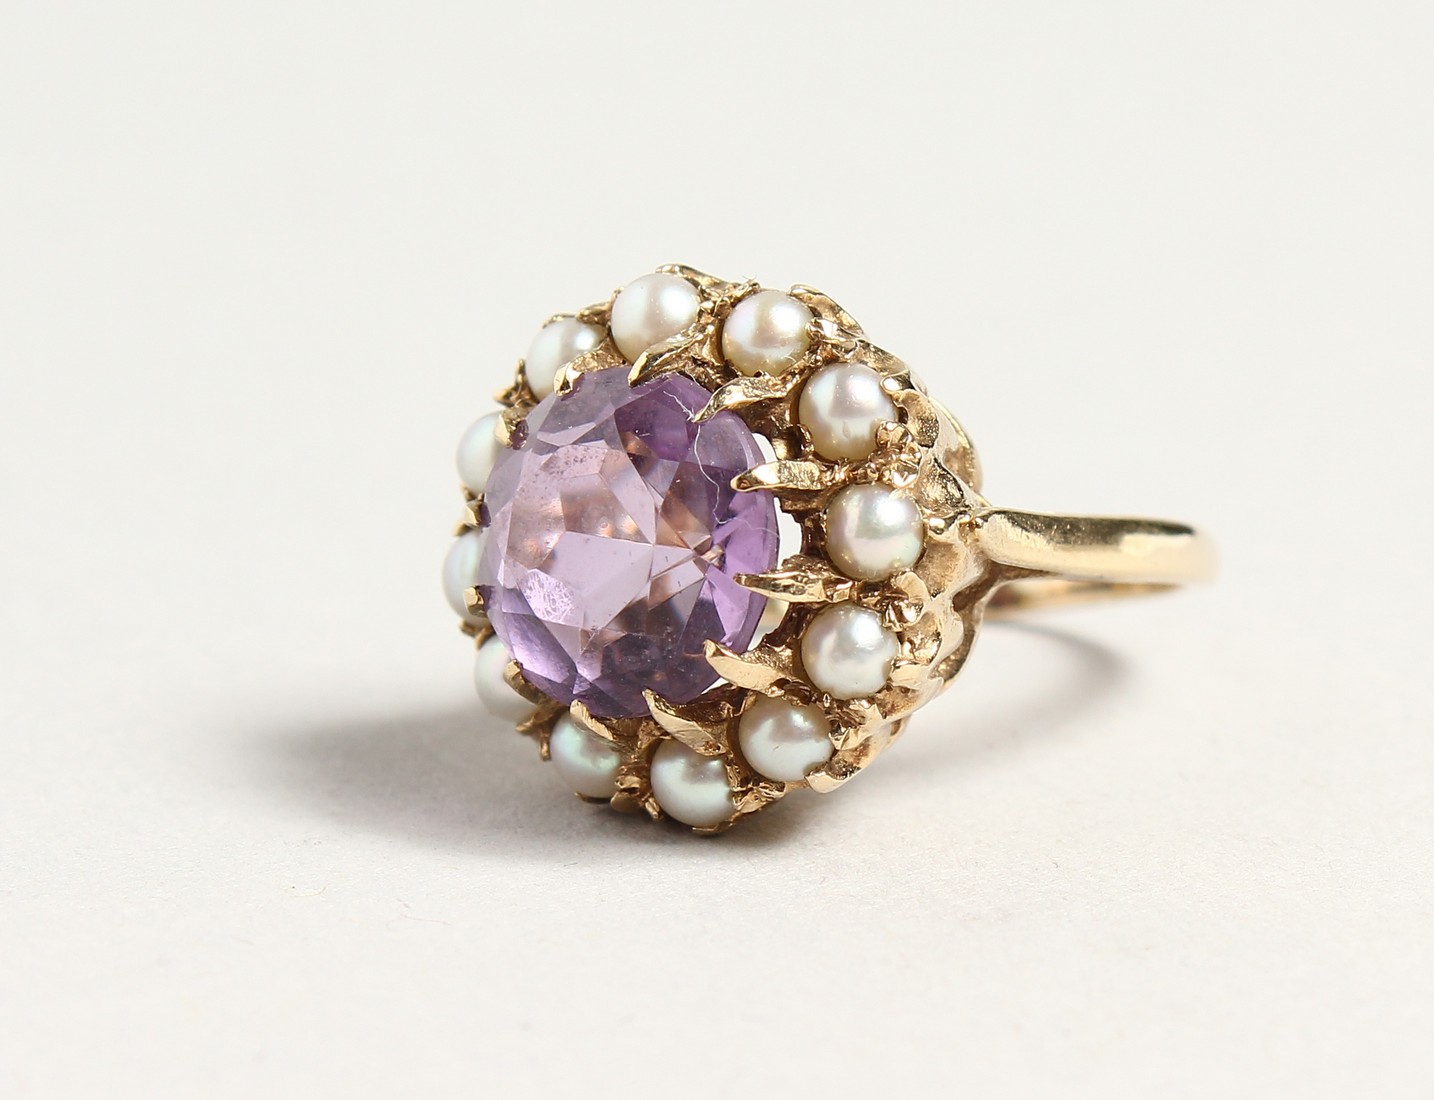 A GOLD CIRCULAR AMETHYST AND PERAL CLUSTER RING